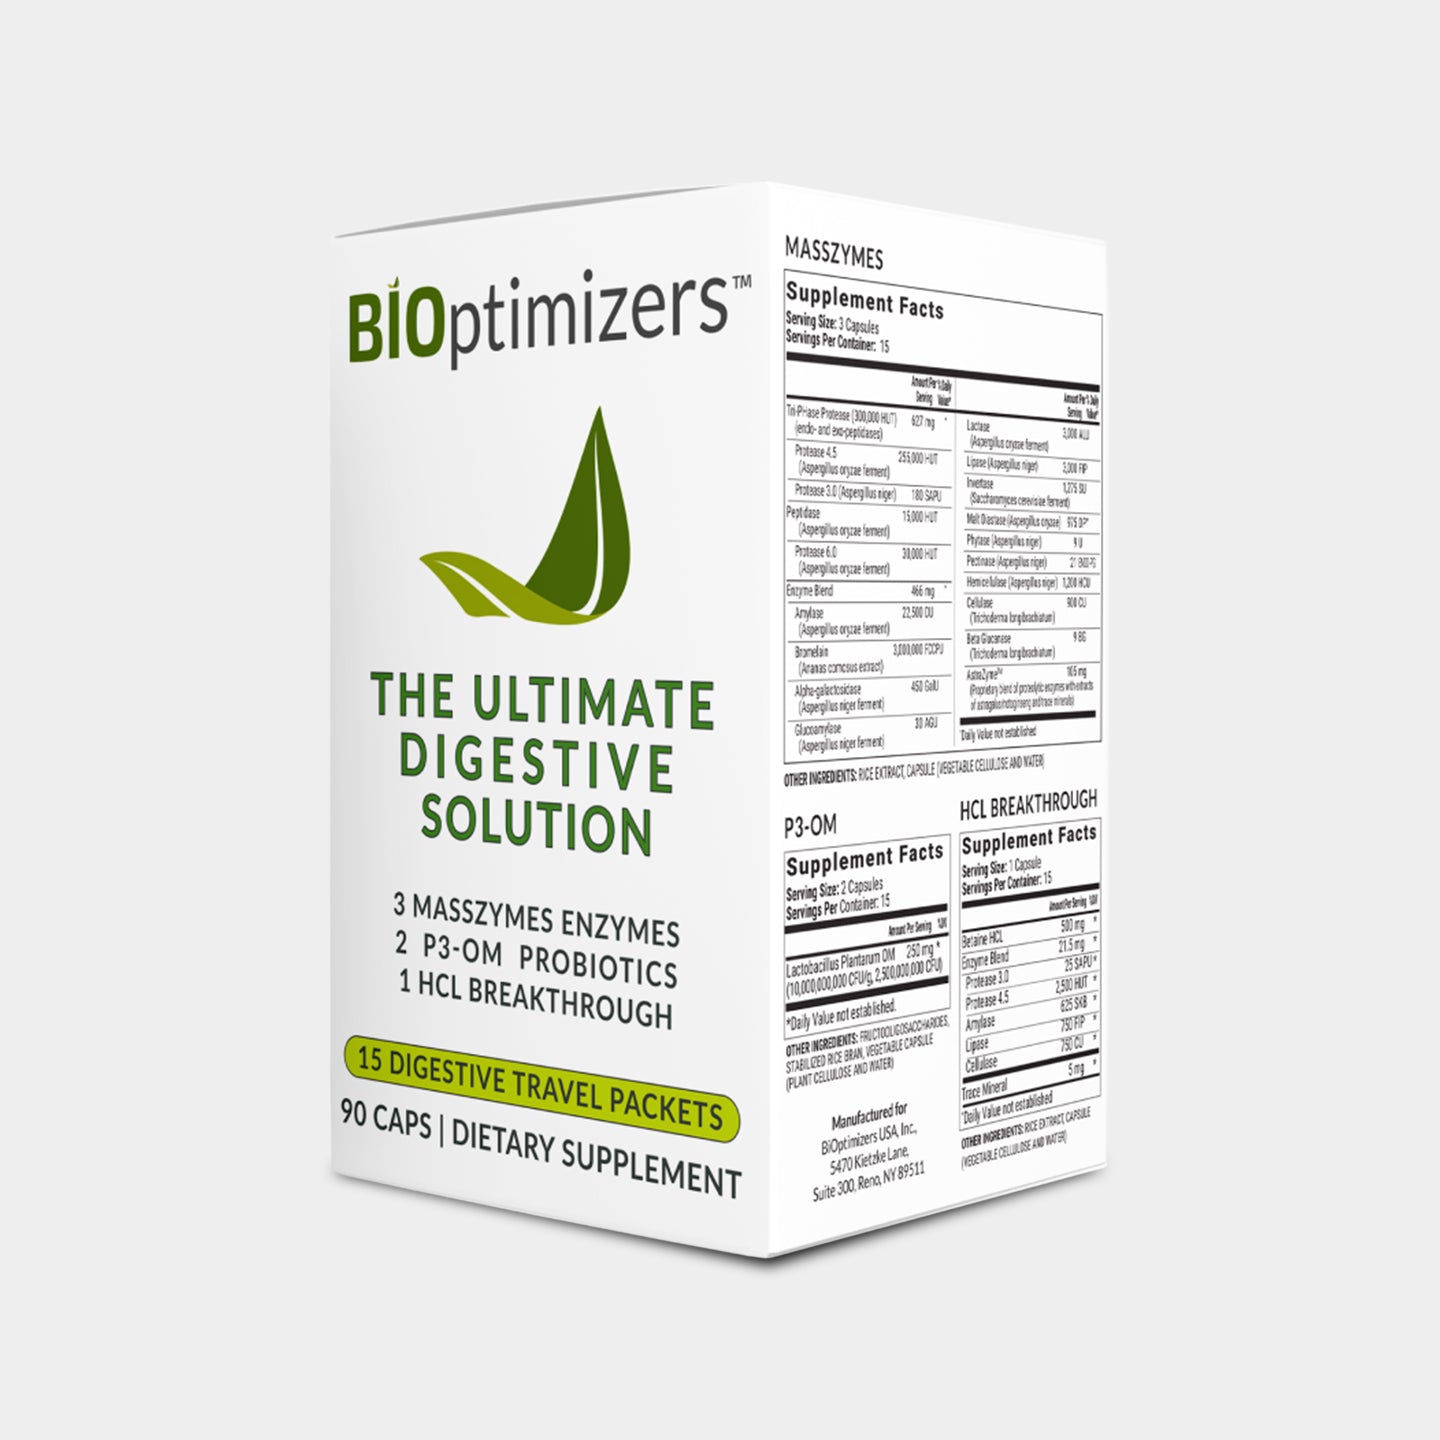 BIOptimizers The Ultimate Digestive Solution A1